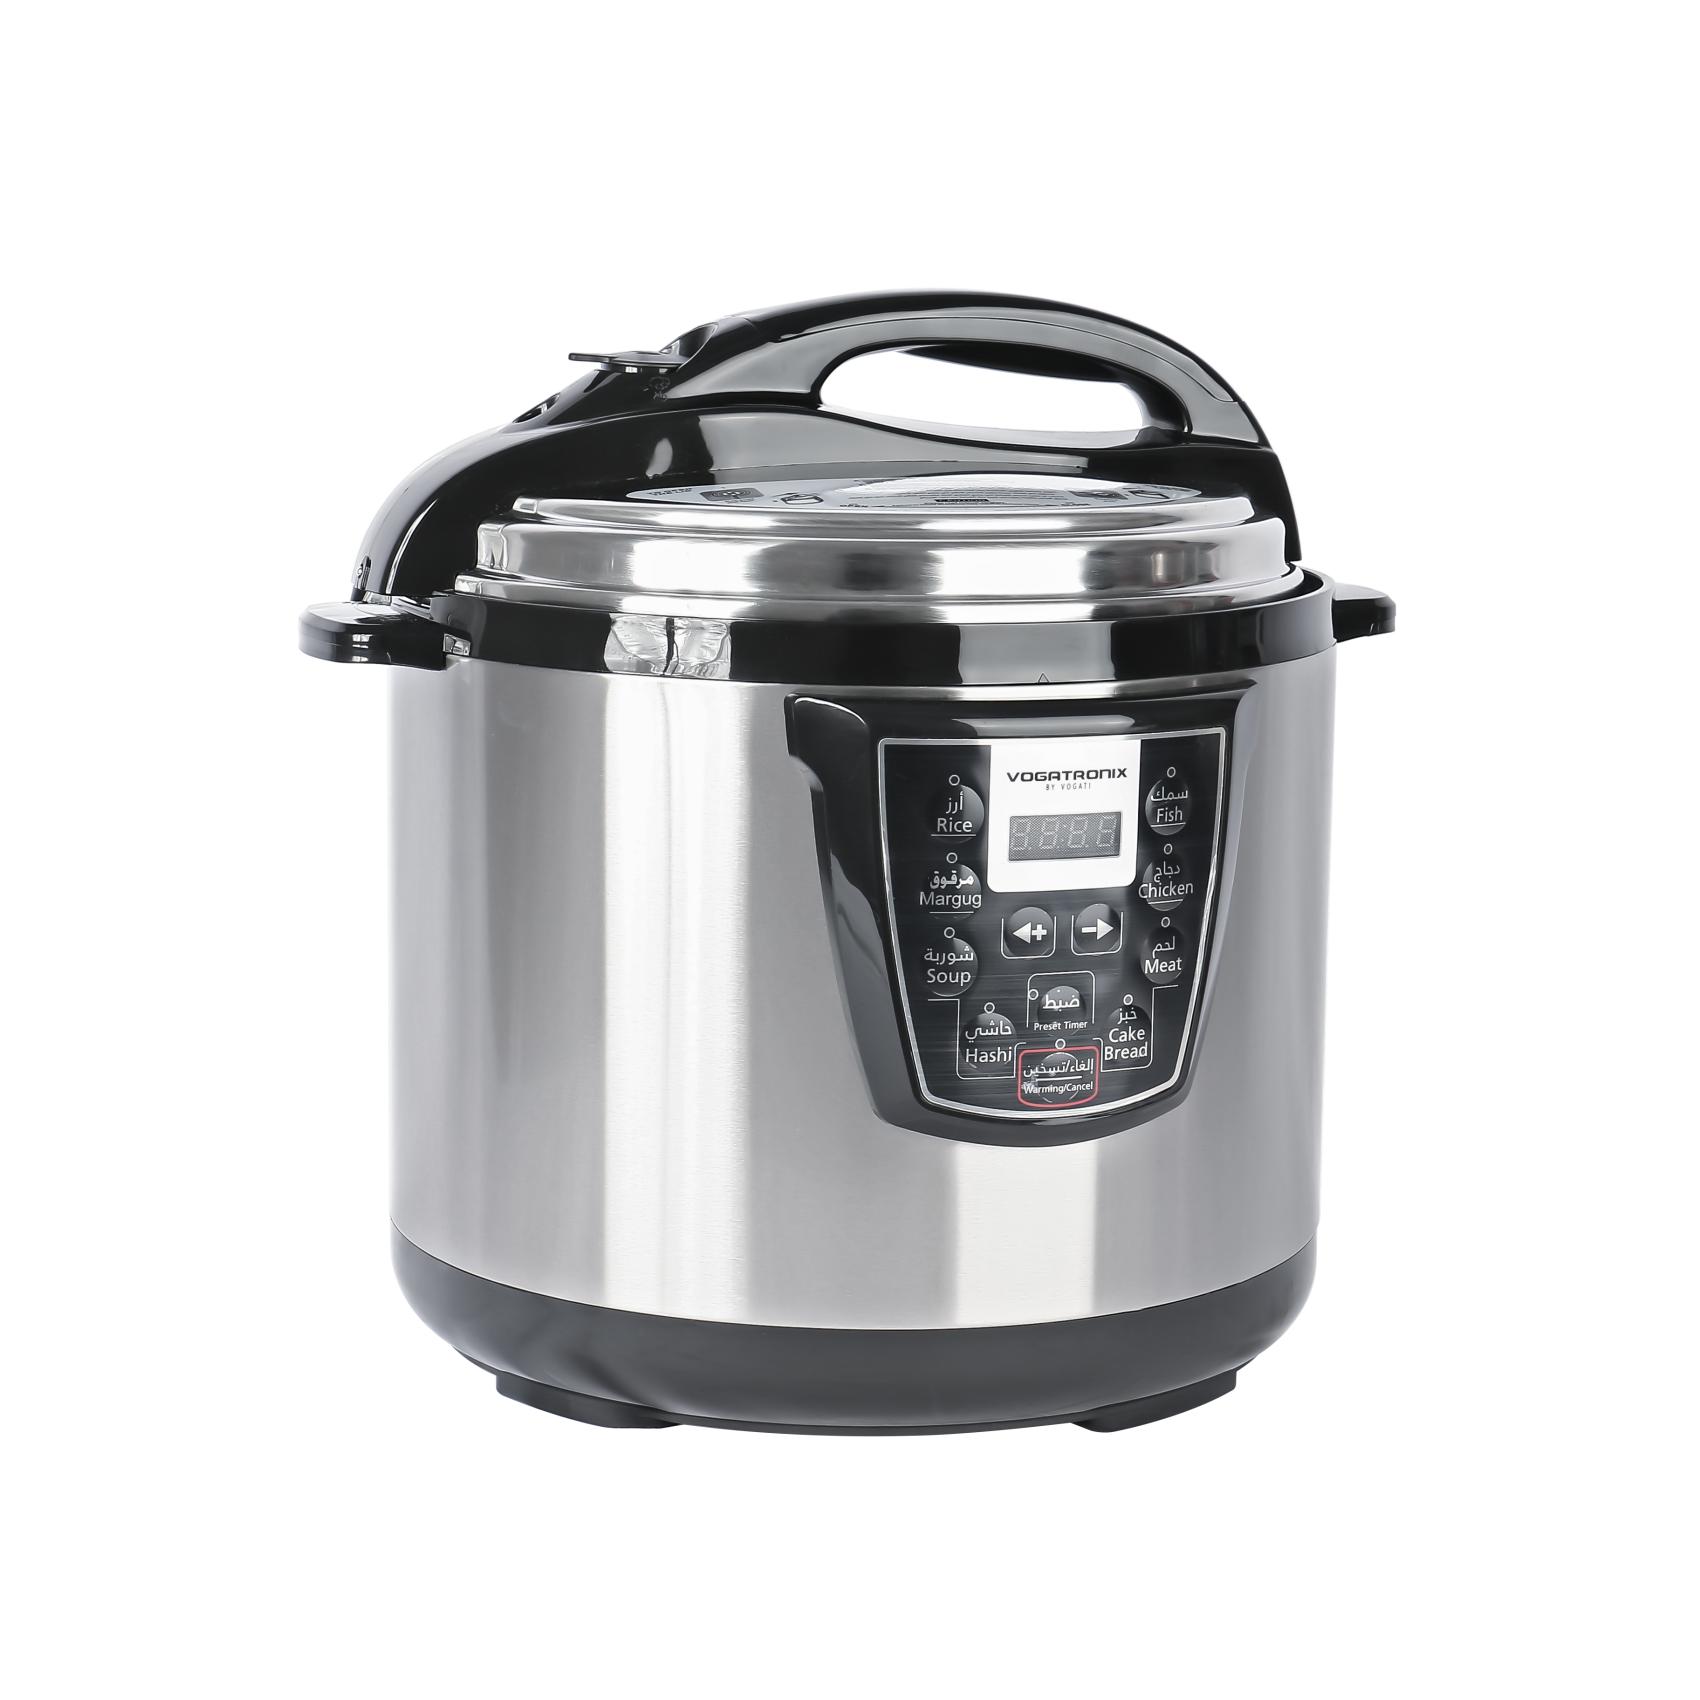 ELECTRIC PRESSURE COOKER 8L 1300W MULTI-FUNCTION | 8 COOKING MODES | STAINLESS-STEEL HOUSING | SAFETY PROTECTION | DOUBLE NON-STICK COATING VE-123

